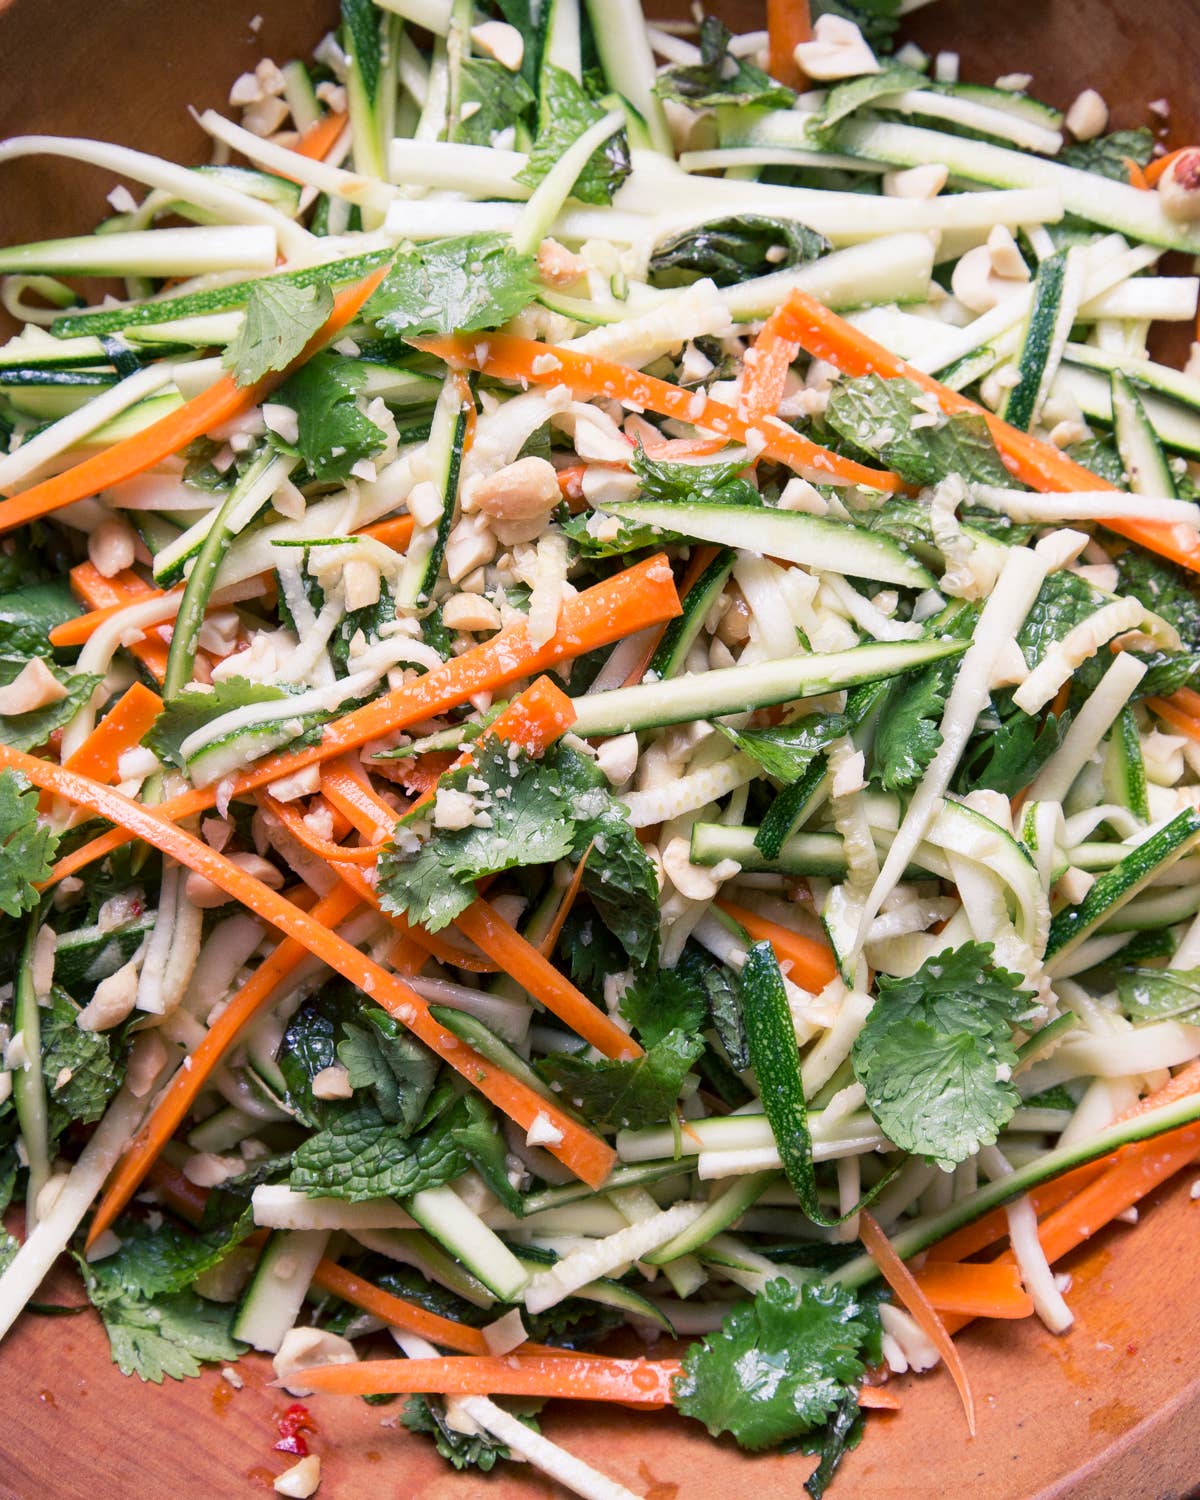 Spicy Thai-style Zucchini & Carrot Salad